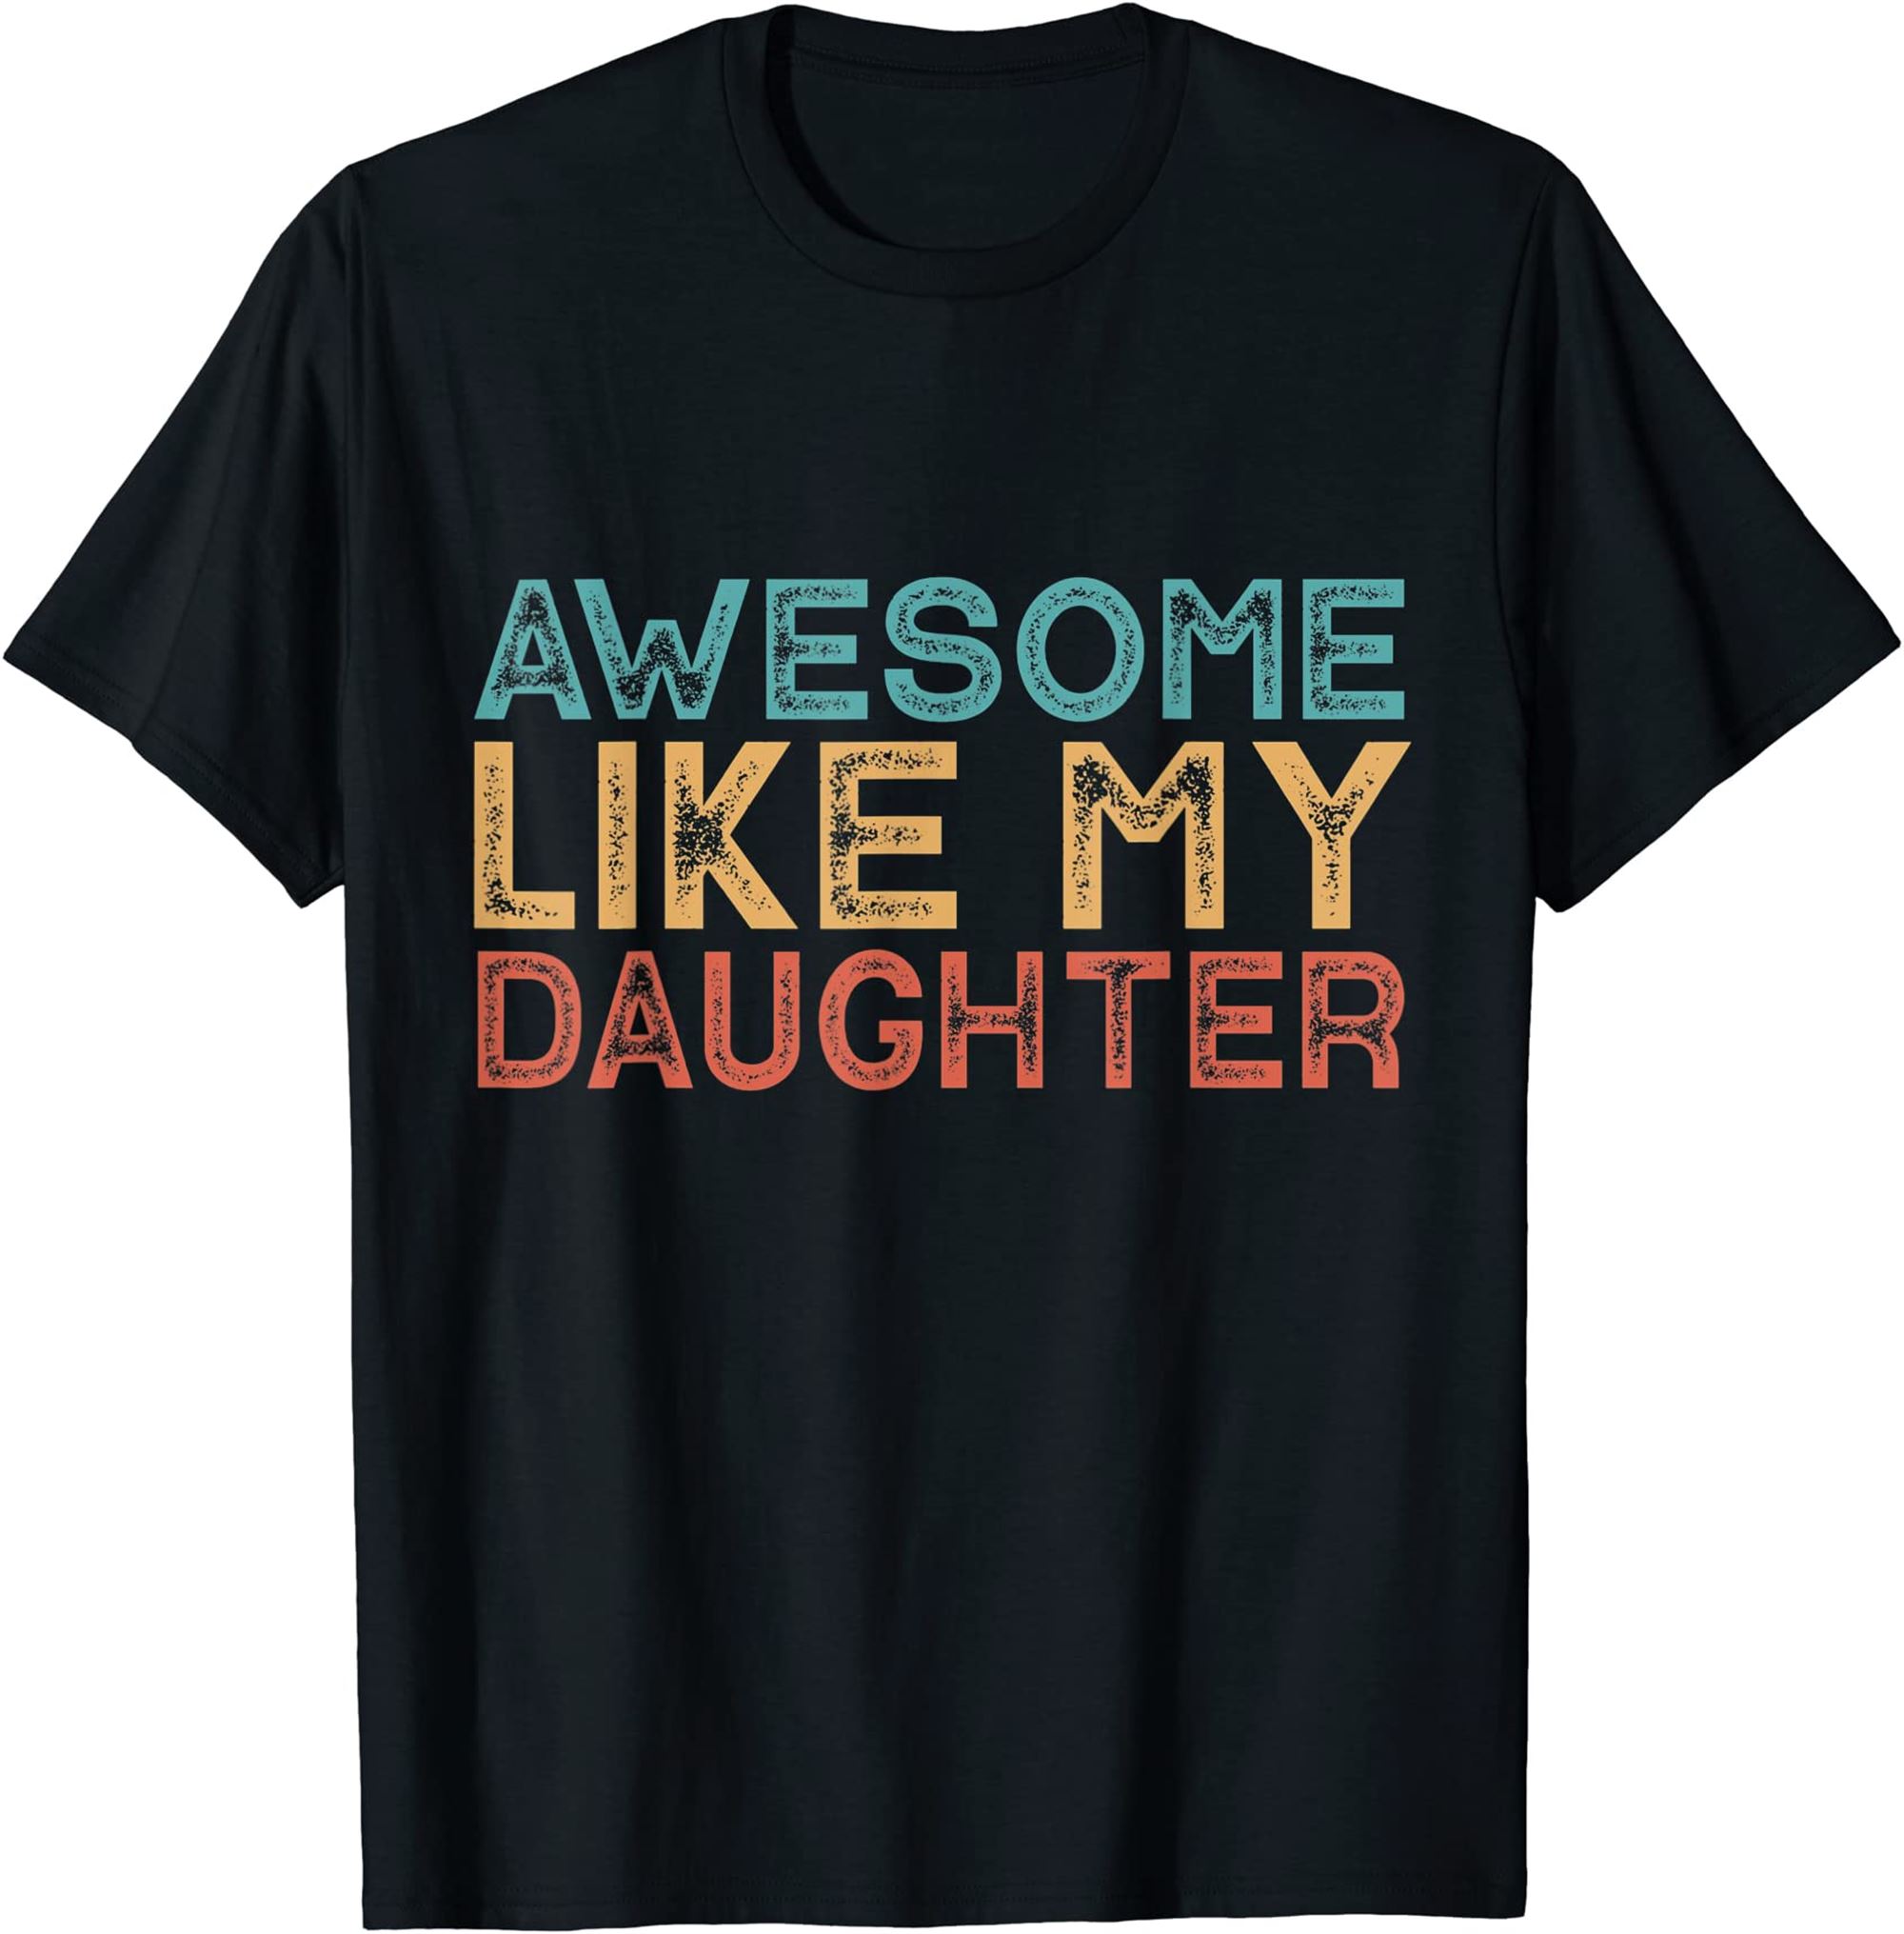 Awesome Like My Daughter T-shirt Full Size Up To 5xl